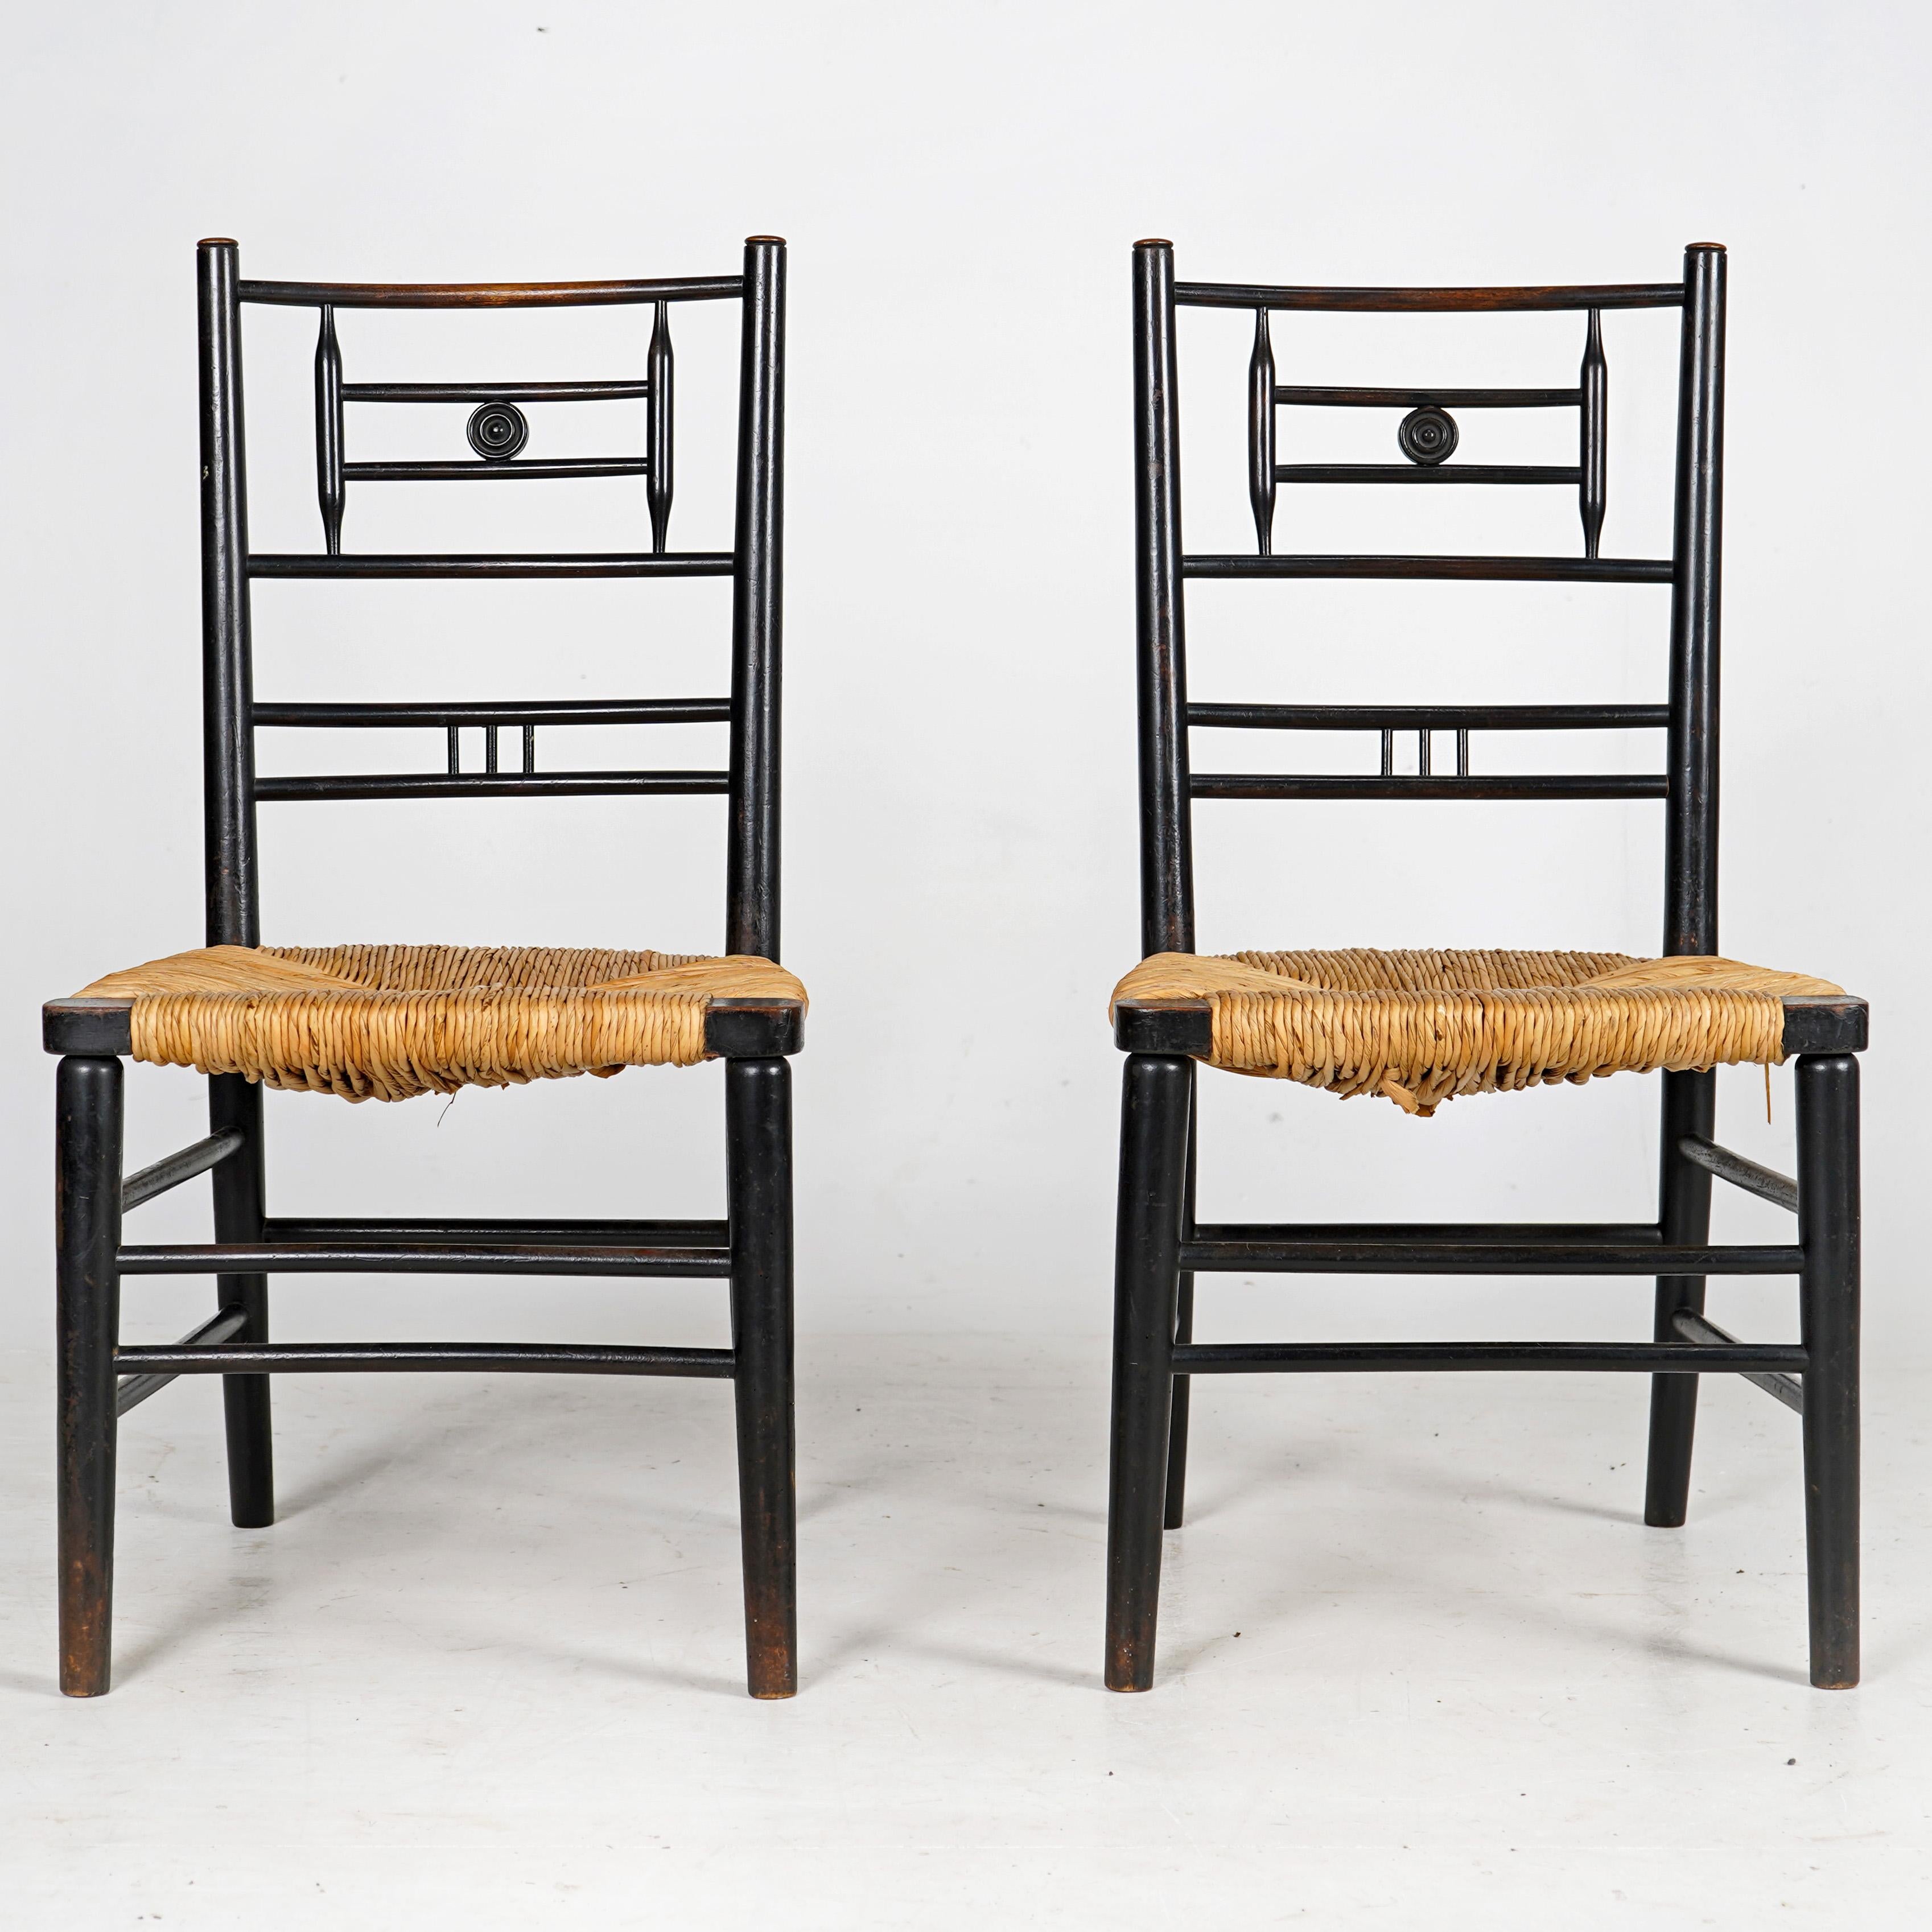 Pair of Arts and Crafts ebonised rush seat chairs. 
Early 20th century occasional chairs with newly rushed seats. 
Good useable condition, some remnants of wood worm, treated thoroughly. 

Dimensions
 
Height - 83cm
Width - 43cm
Depth - 38cm
Seat